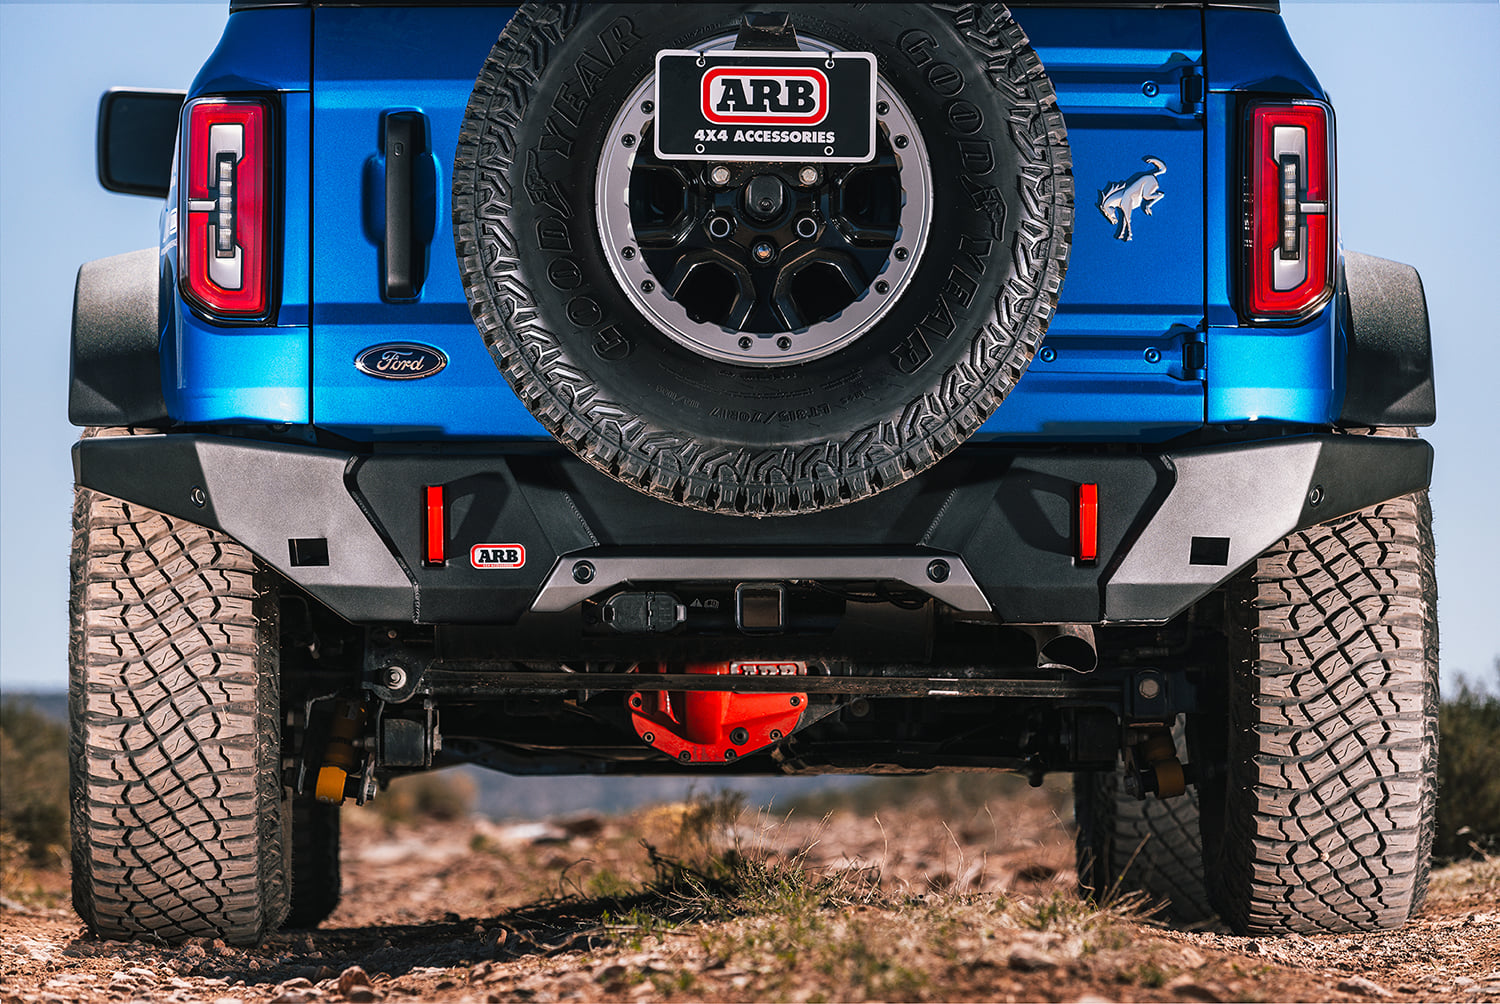 Ford Bronco ARB releases pricing for front / rear bumpers and frame mounted sliders for 2021 Bronco download (1)